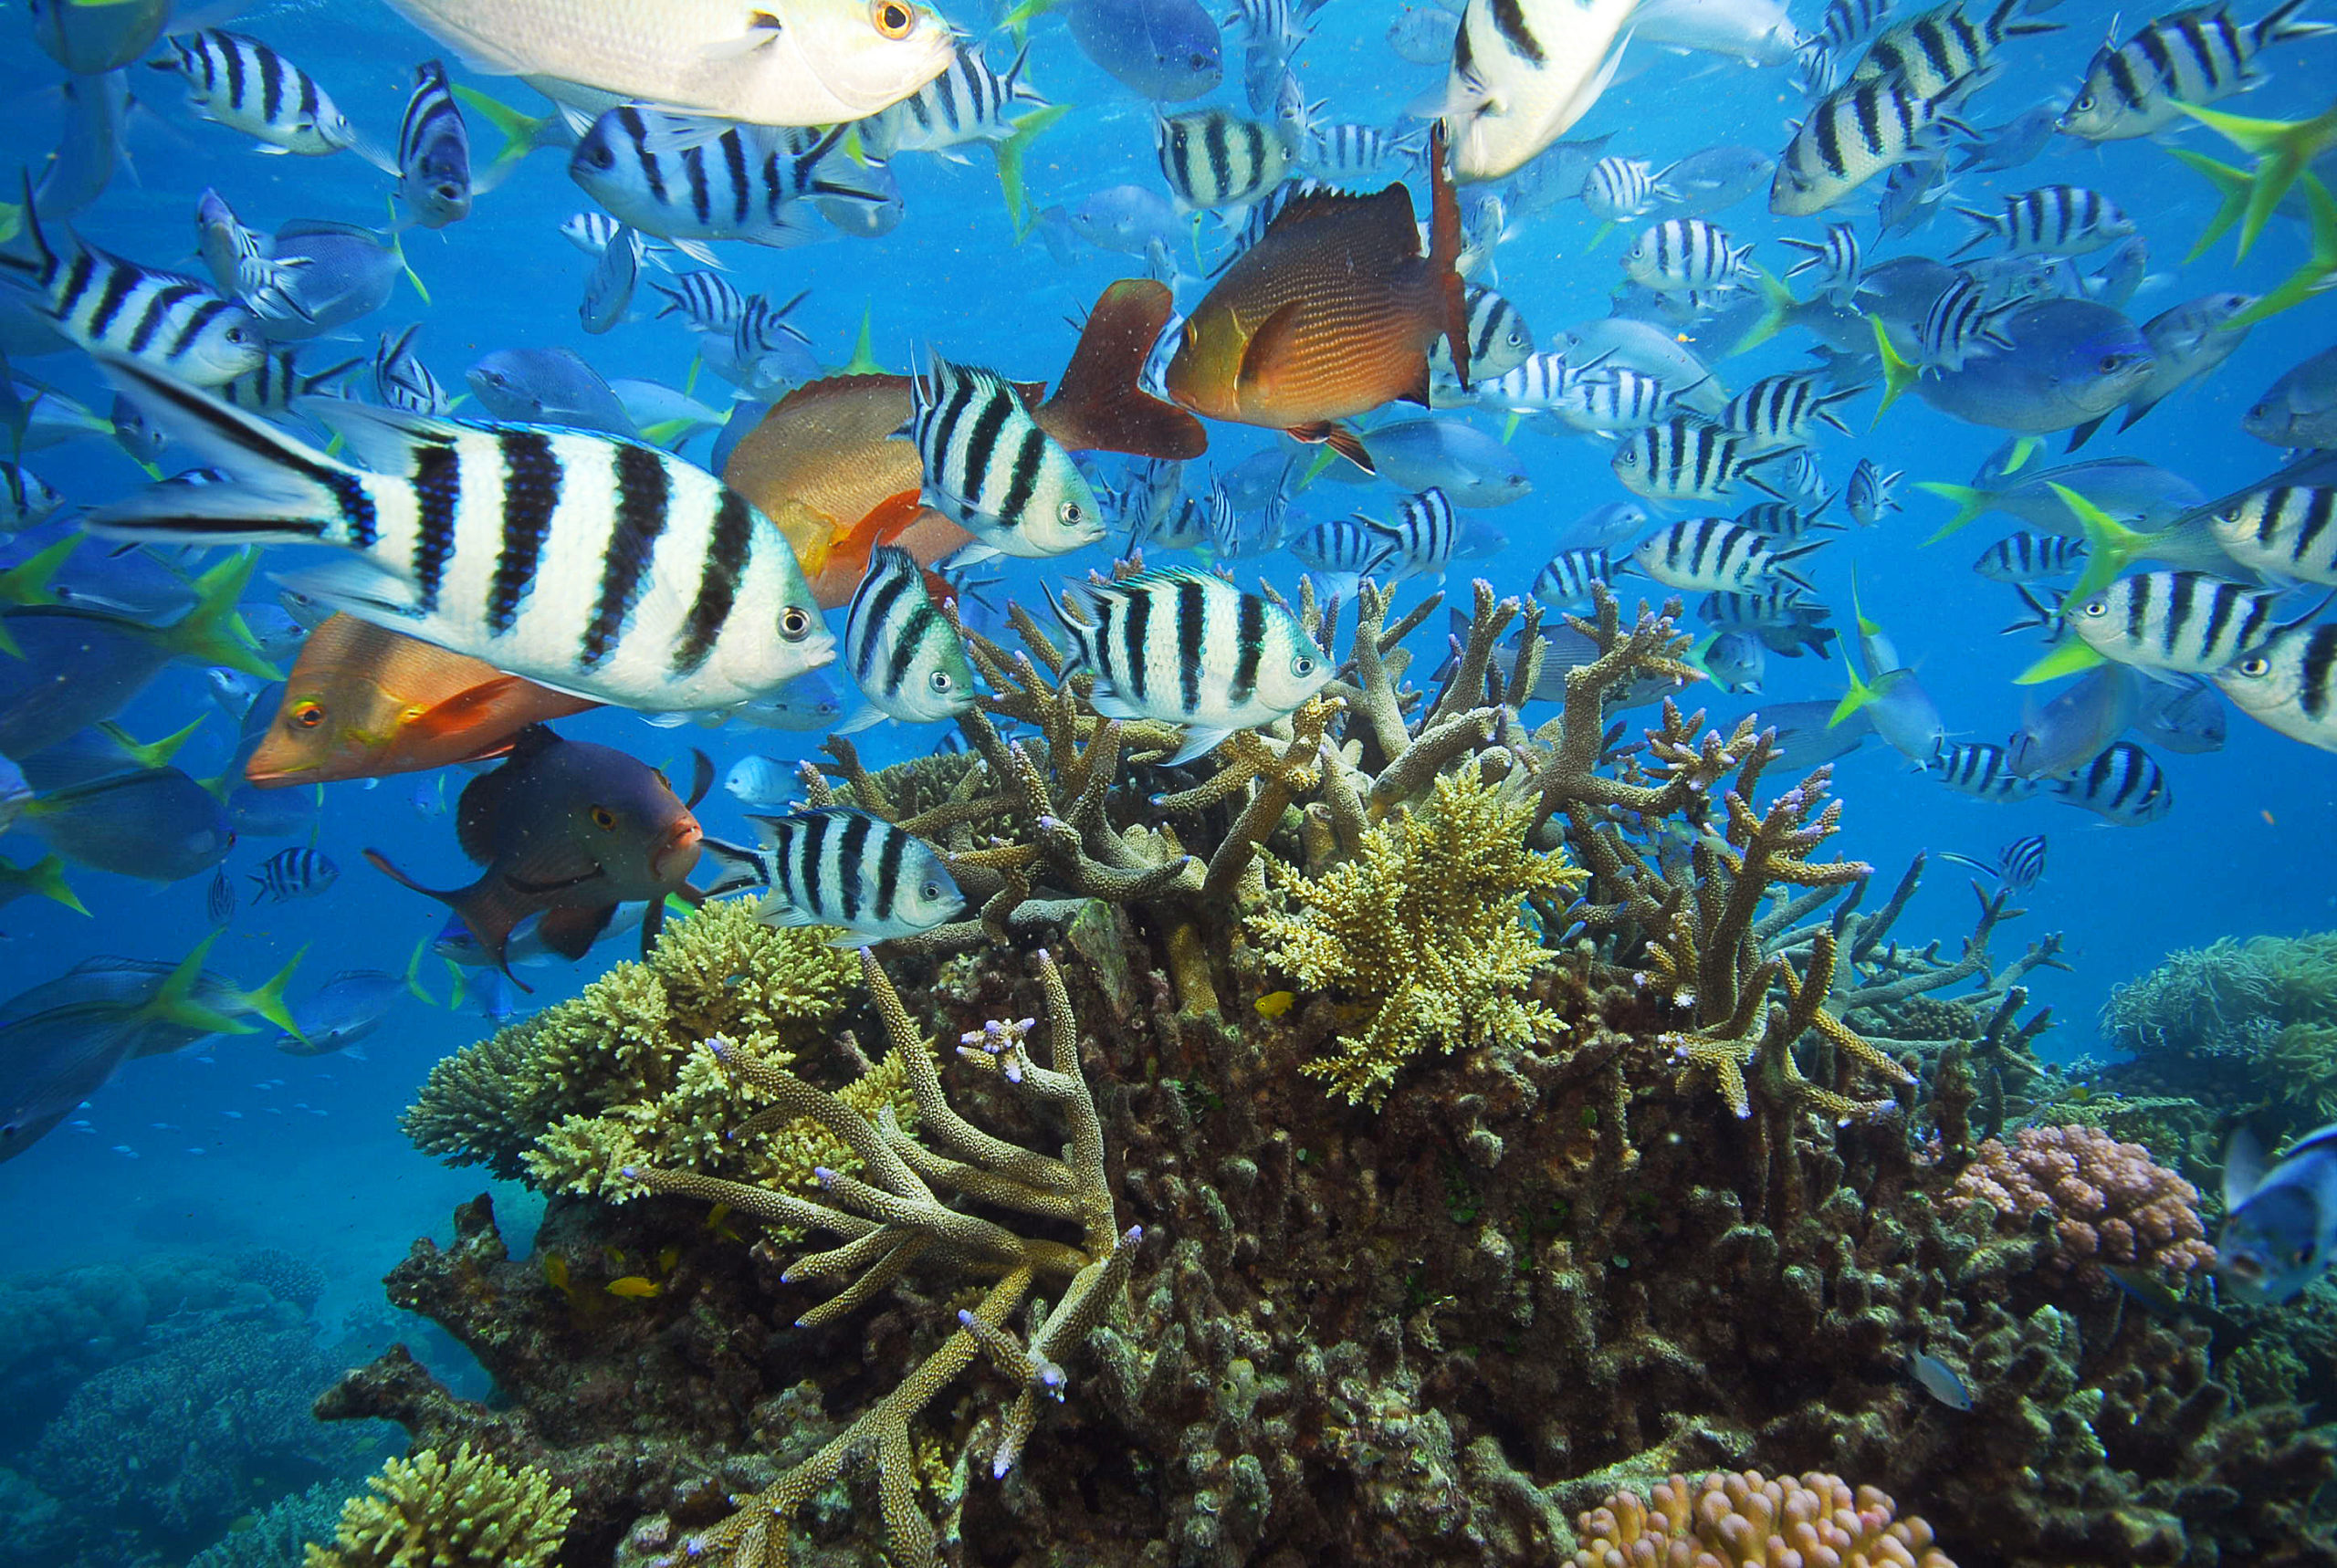 Variety of fish swimming in the Great Barrier Reef.